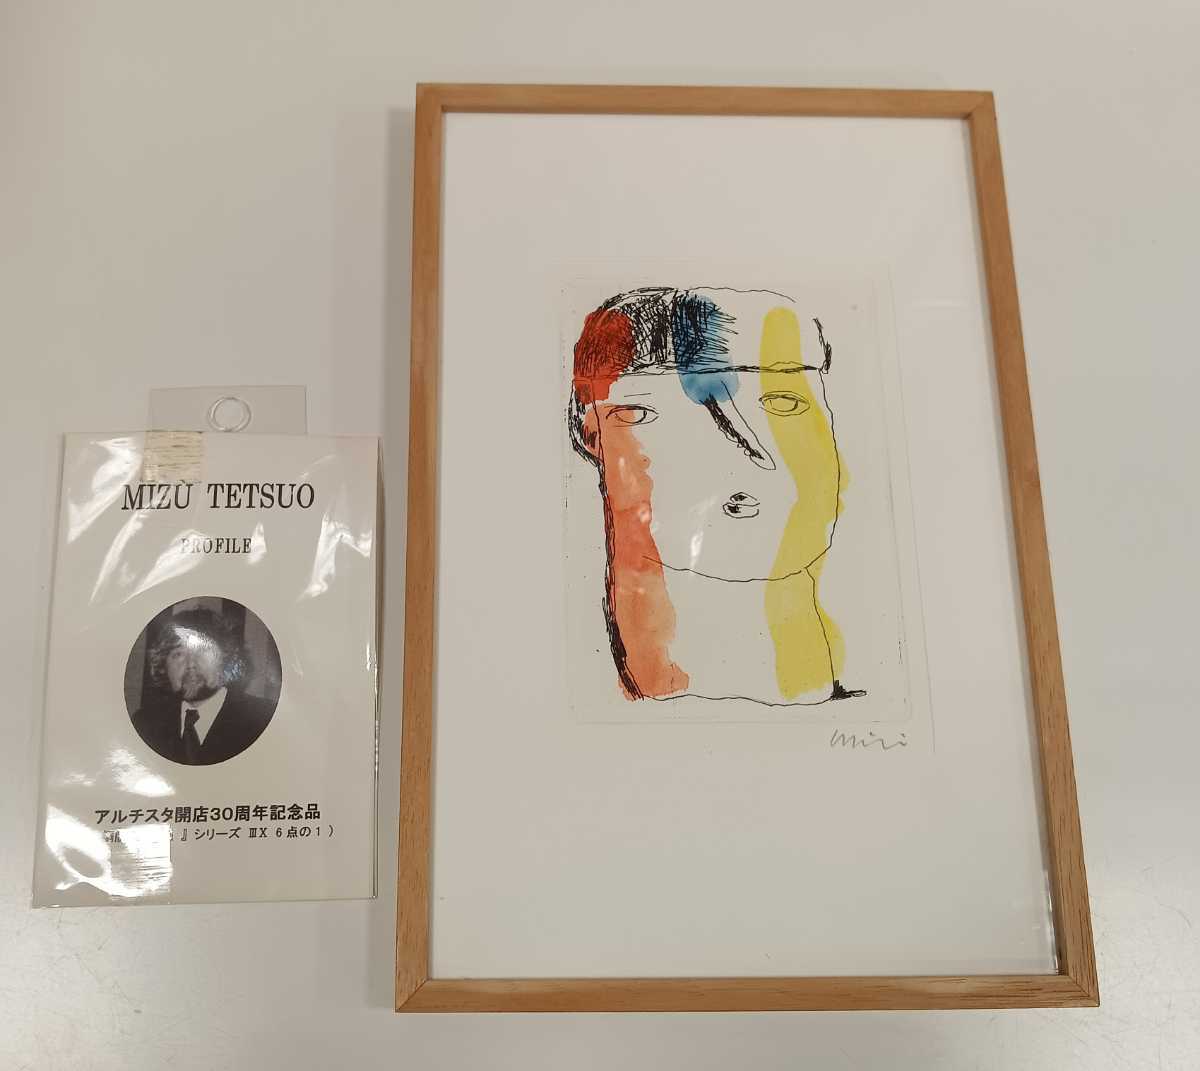 Testuo Mizu Tetsuo Mizushima Copperplate Print Face Series IIIX 1 of 6 Print Painting Framed, artwork, painting, others